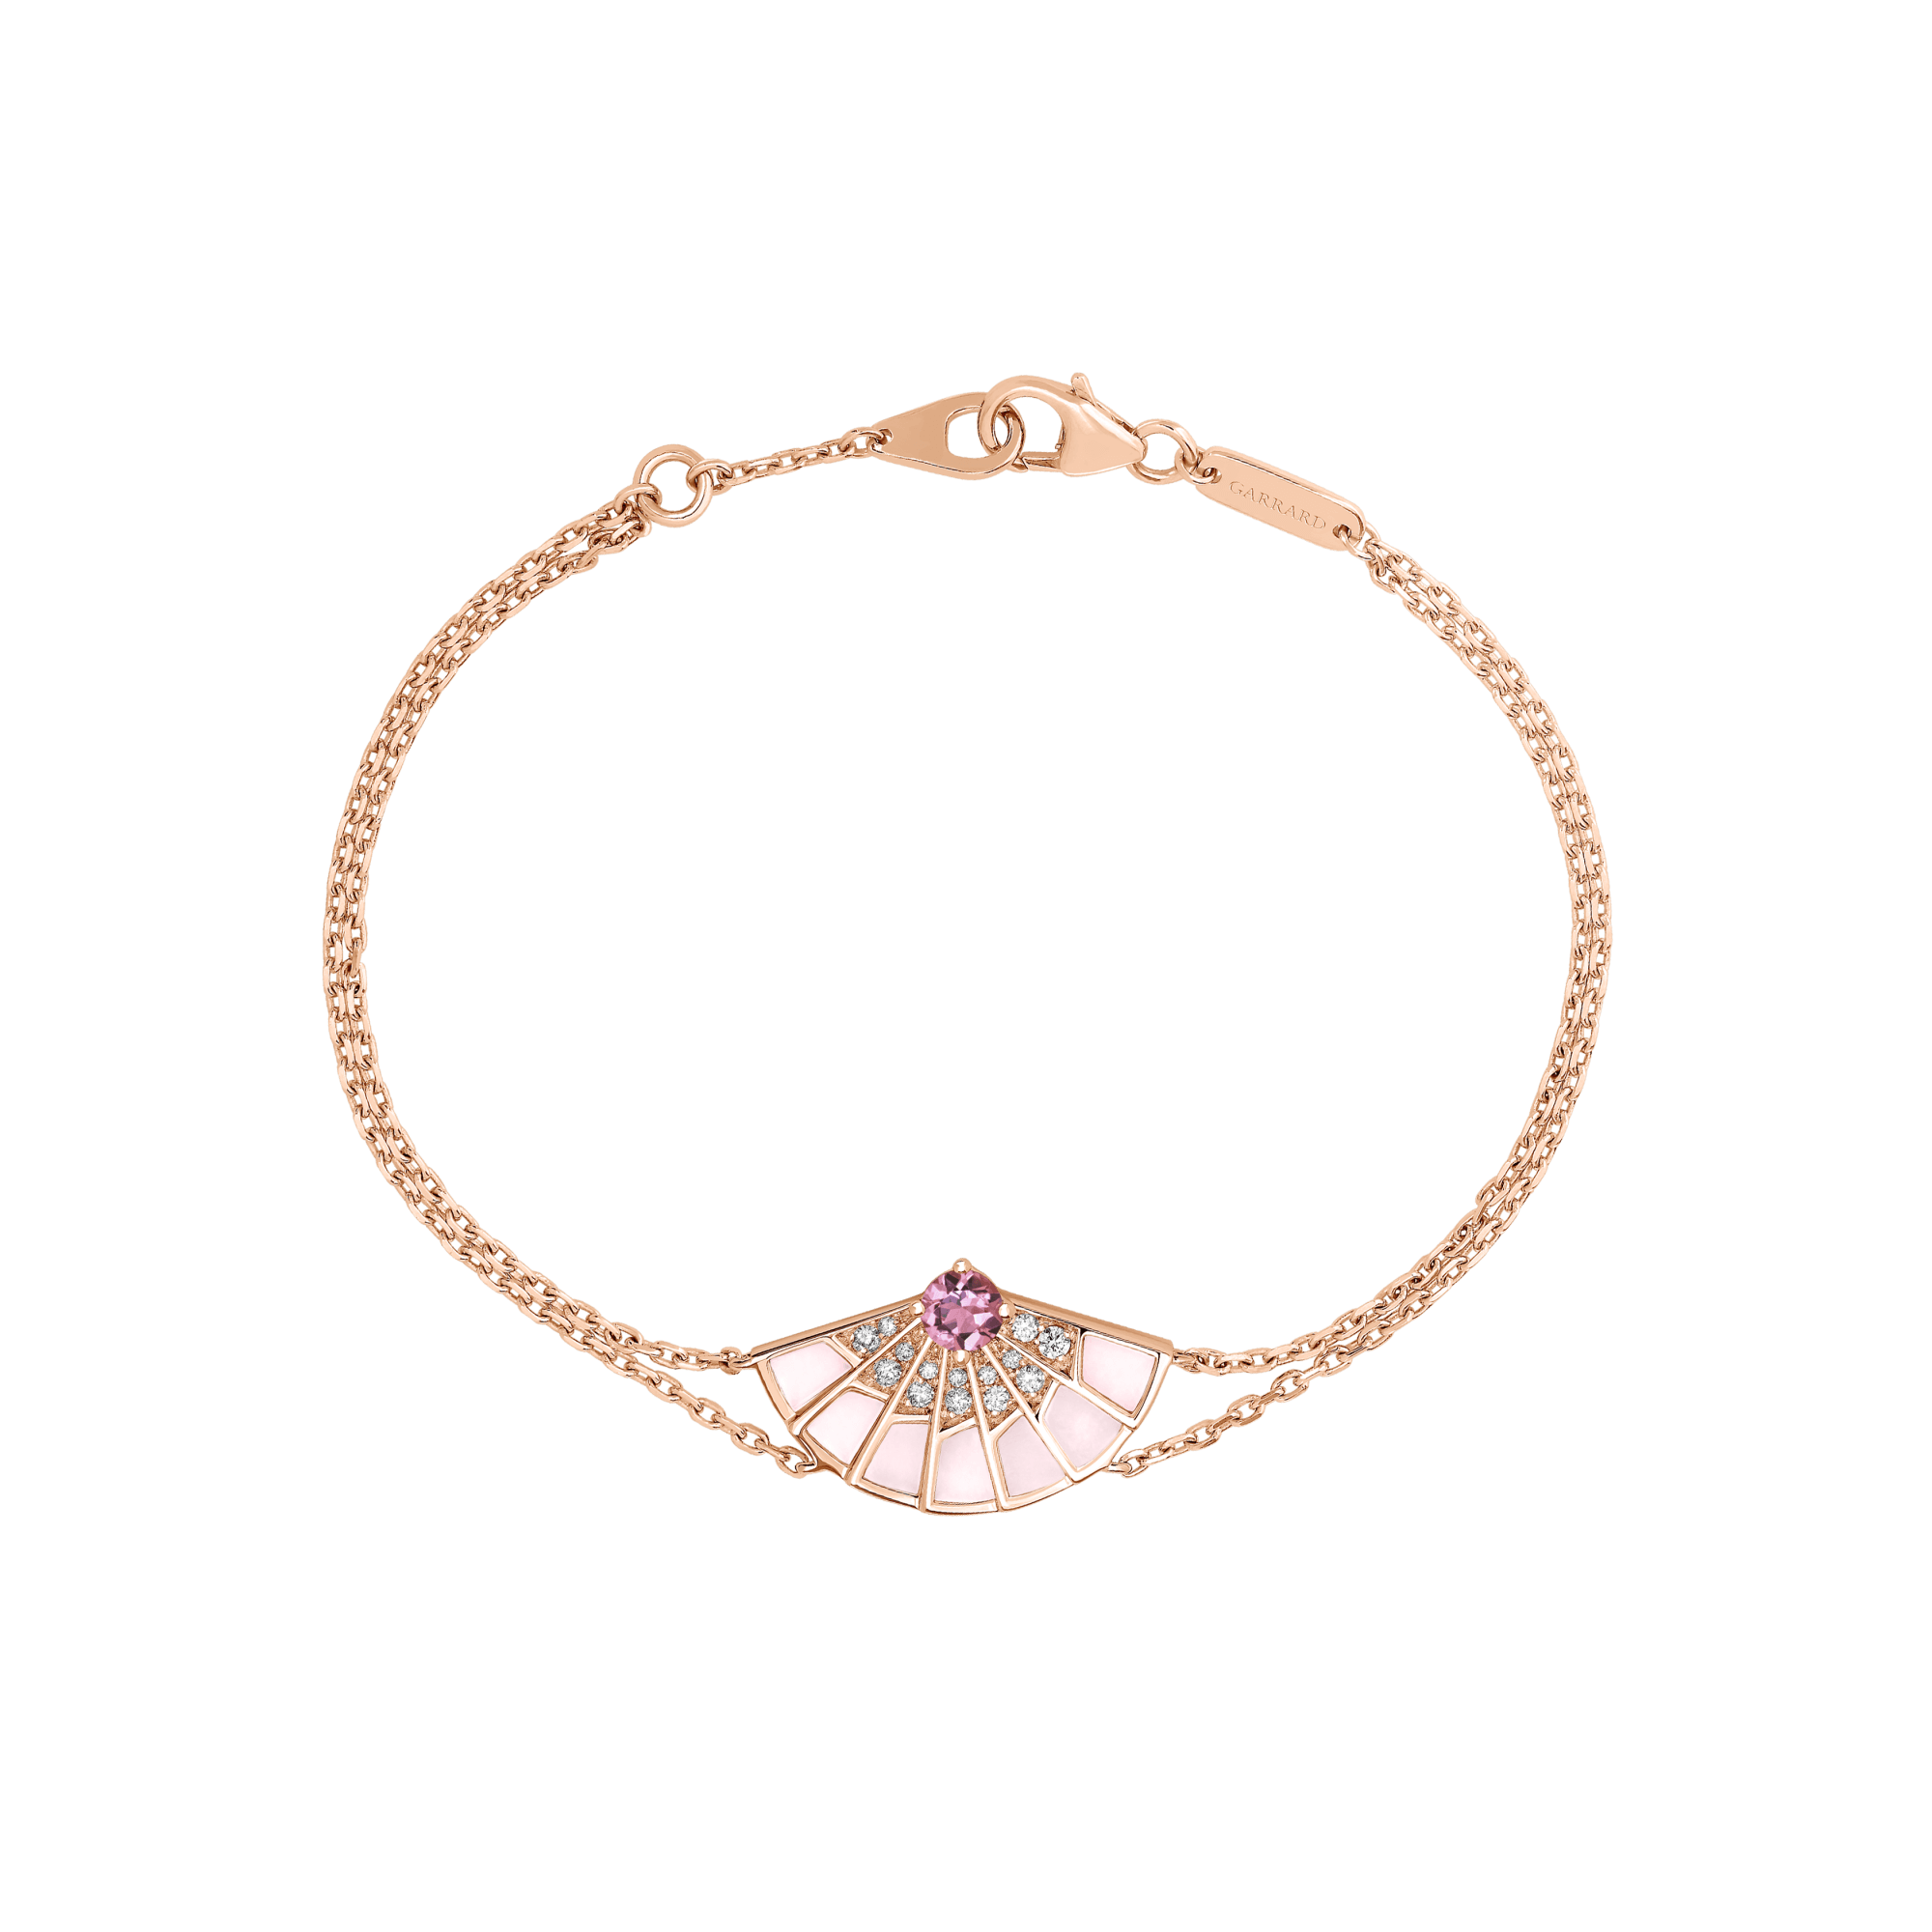 Garrard Fanfare Symphony jewellery collection Pink Tourmaline and Pink Opal Bracelet In 18ct Rose Gold with Diamonds 2018548 Hero